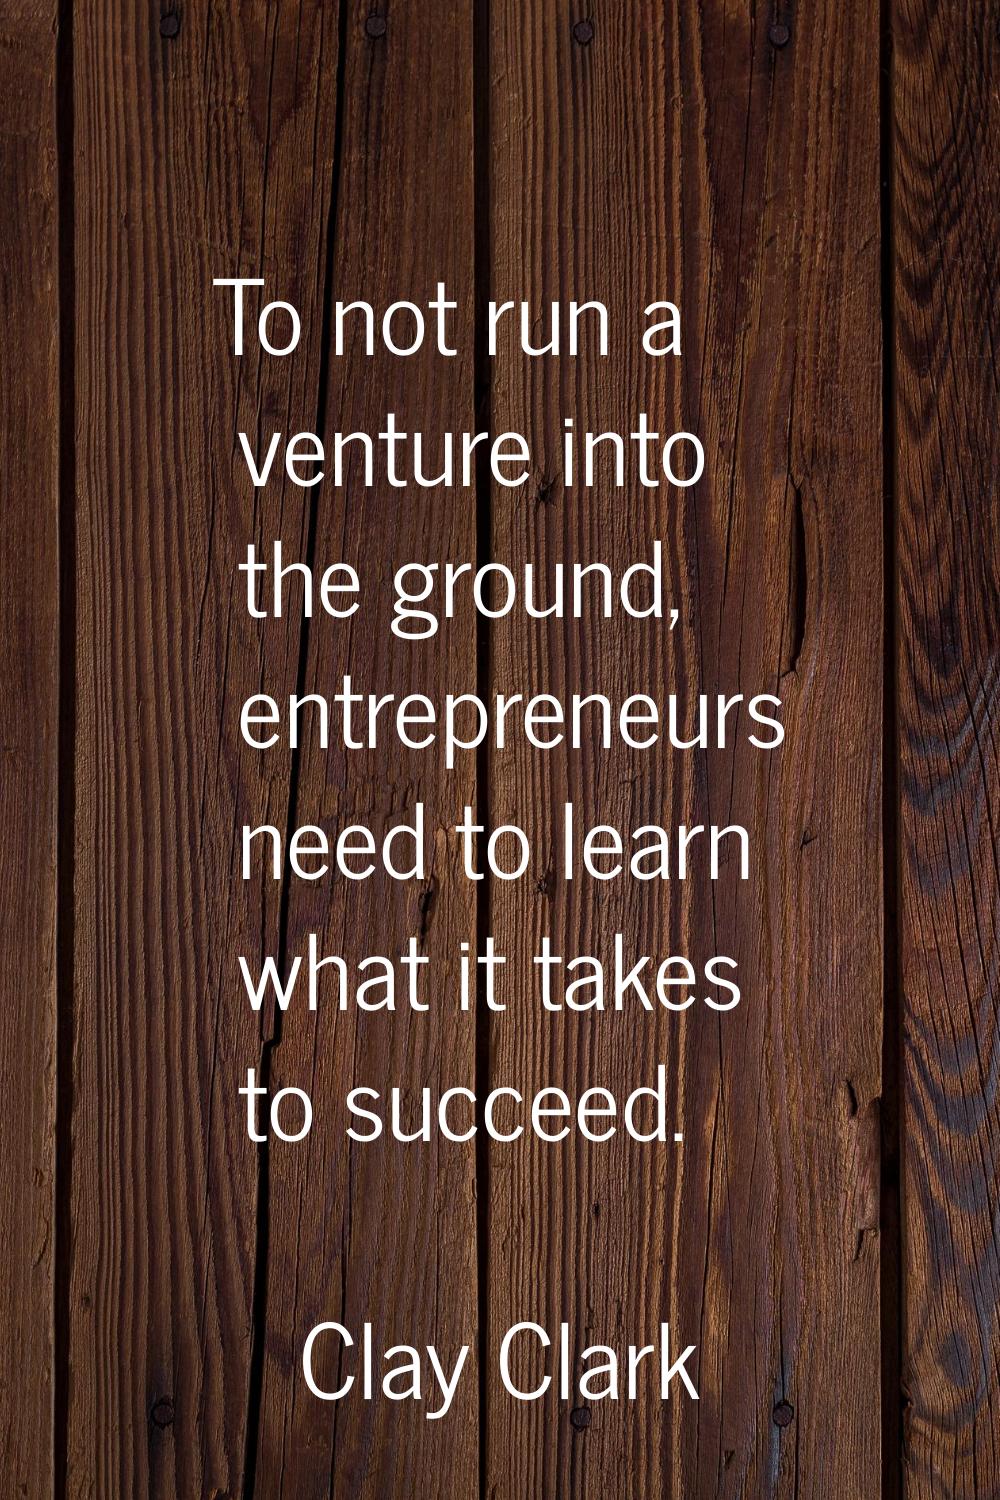 To not run a venture into the ground, entrepreneurs need to learn what it takes to succeed.